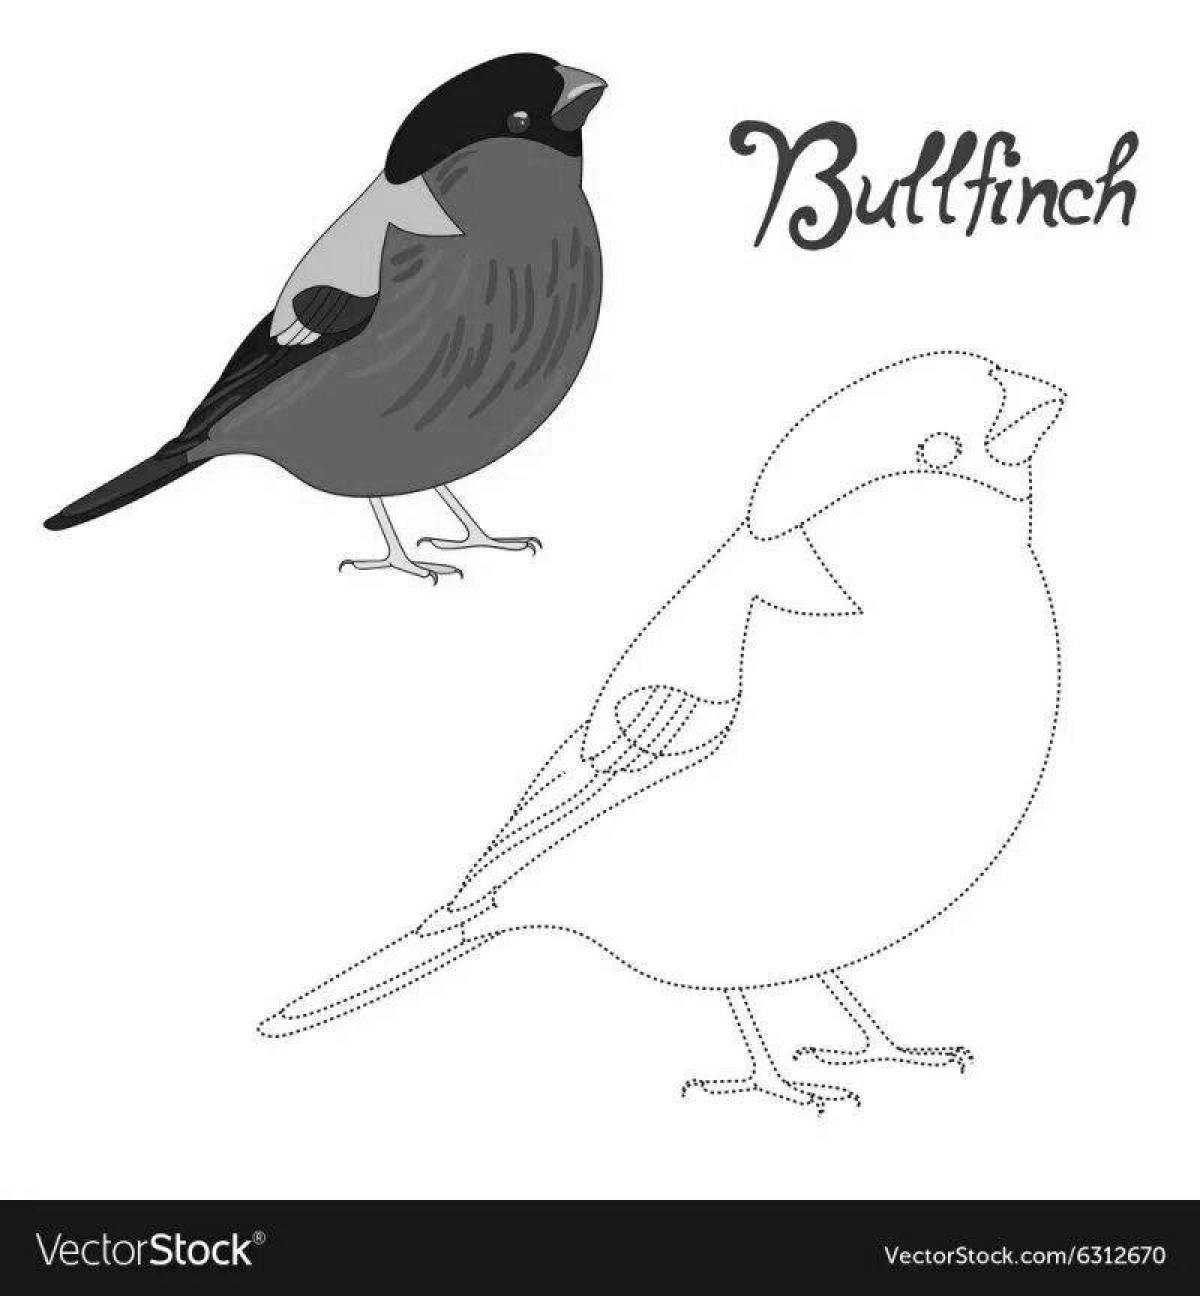 Exciting picture of a bullfinch for kids